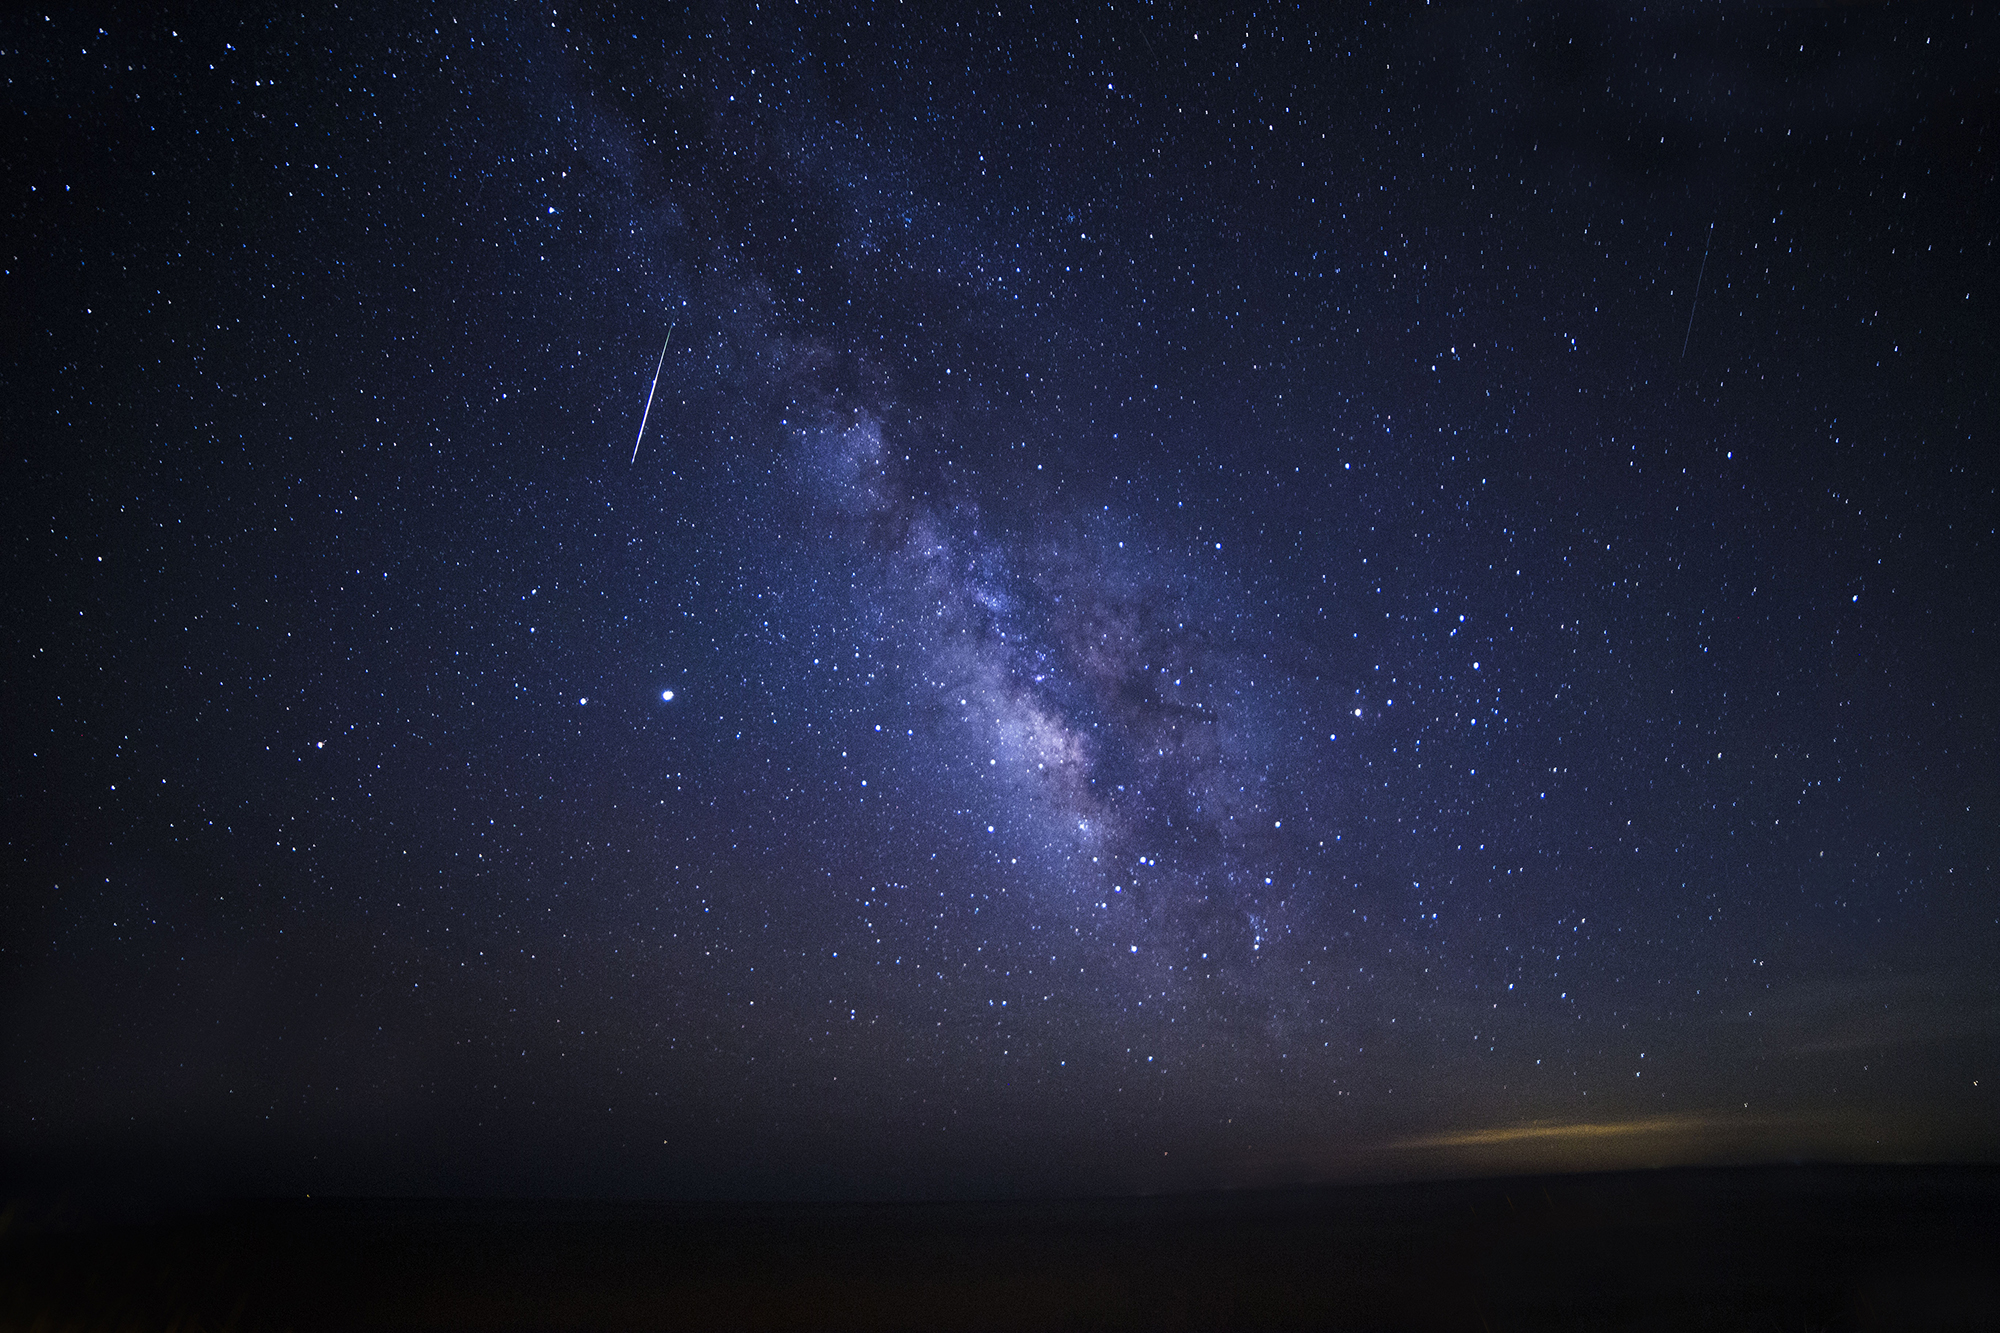 milky way streaks across the center of the image and a meteor in the top left corner leaves a long white trail in the sky.